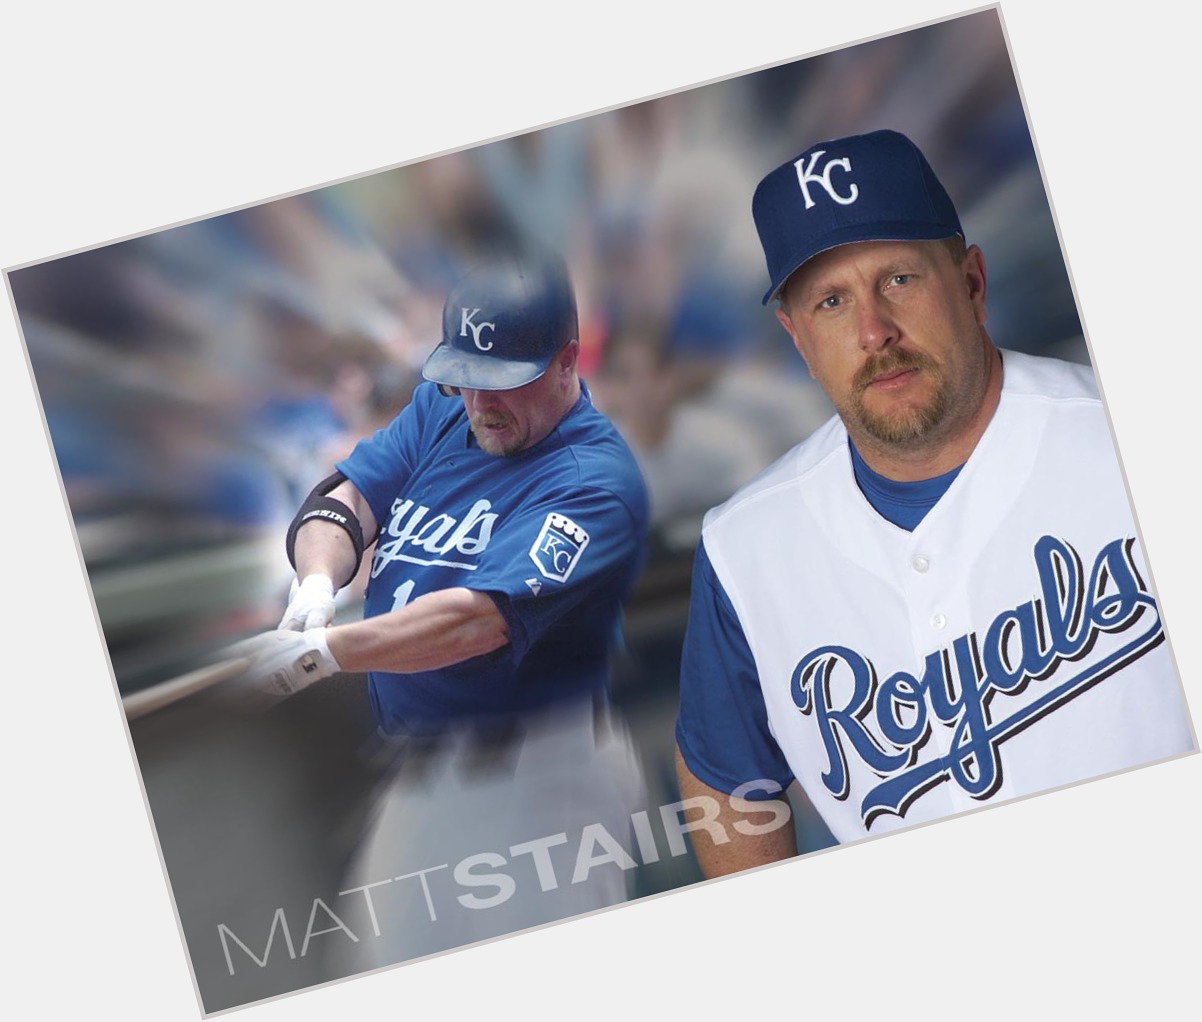 Happy 49th Birthday to former Royals DH/beer league softball player Matt Stairs! 